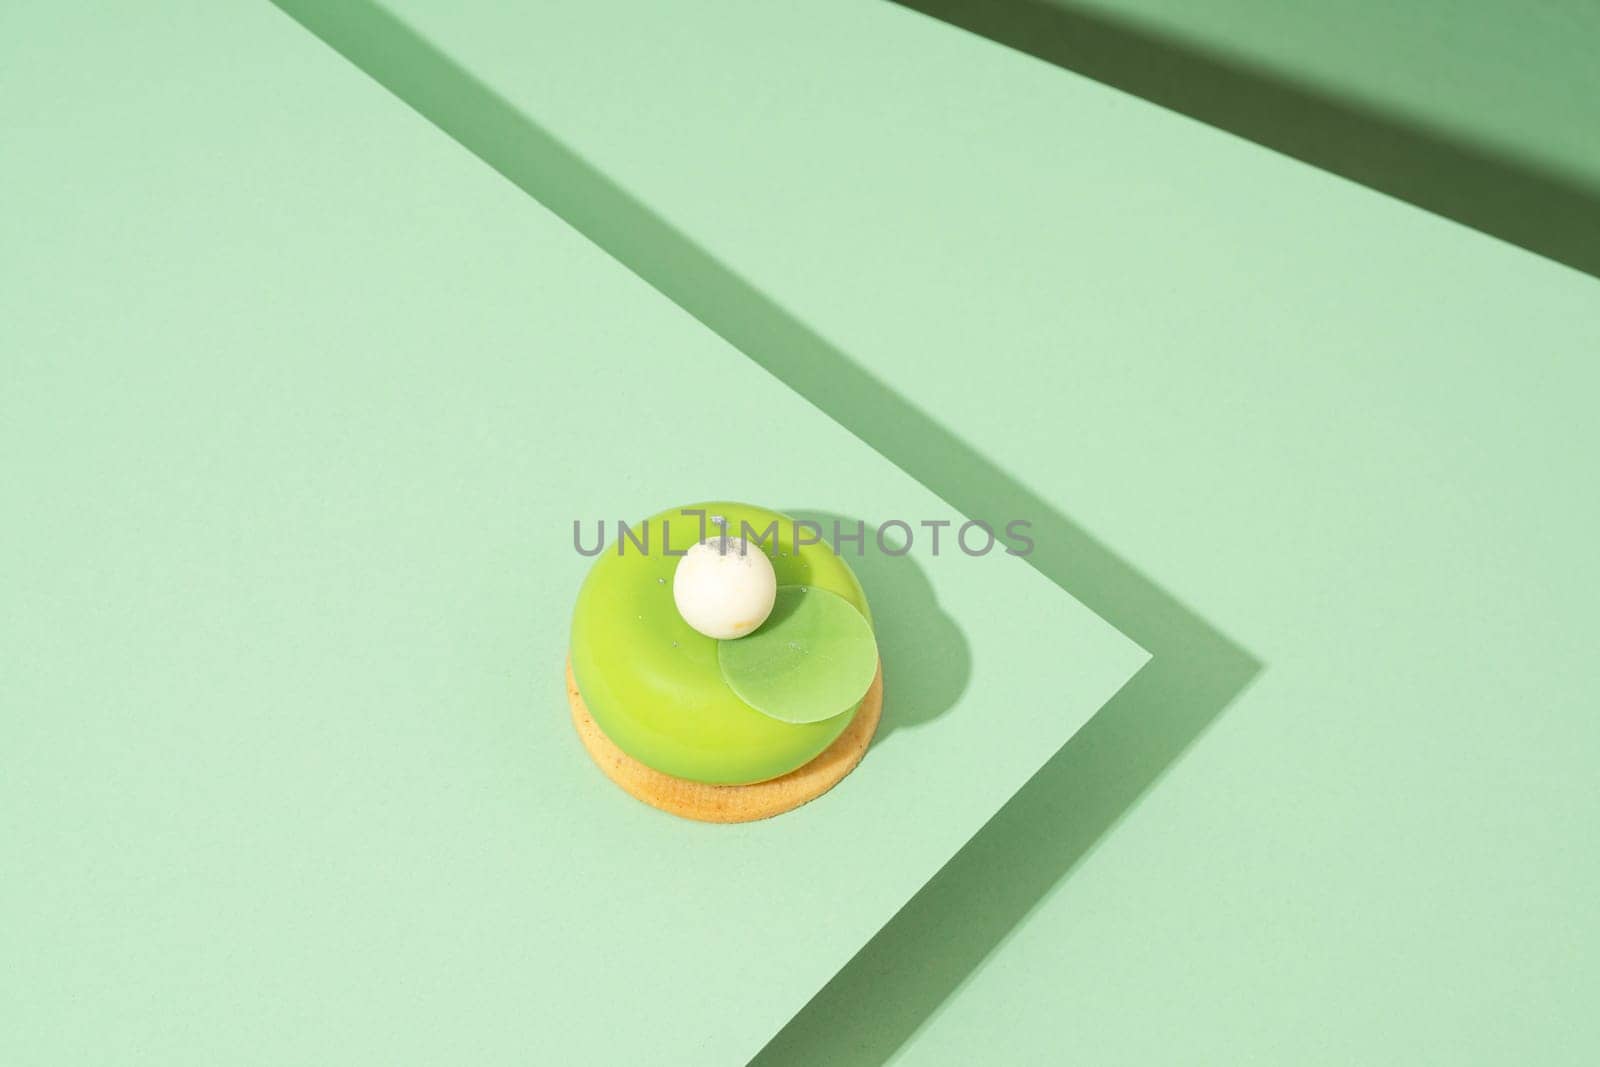 A freshly baked pastry with green and white icing, sitting atop a green-hued surface